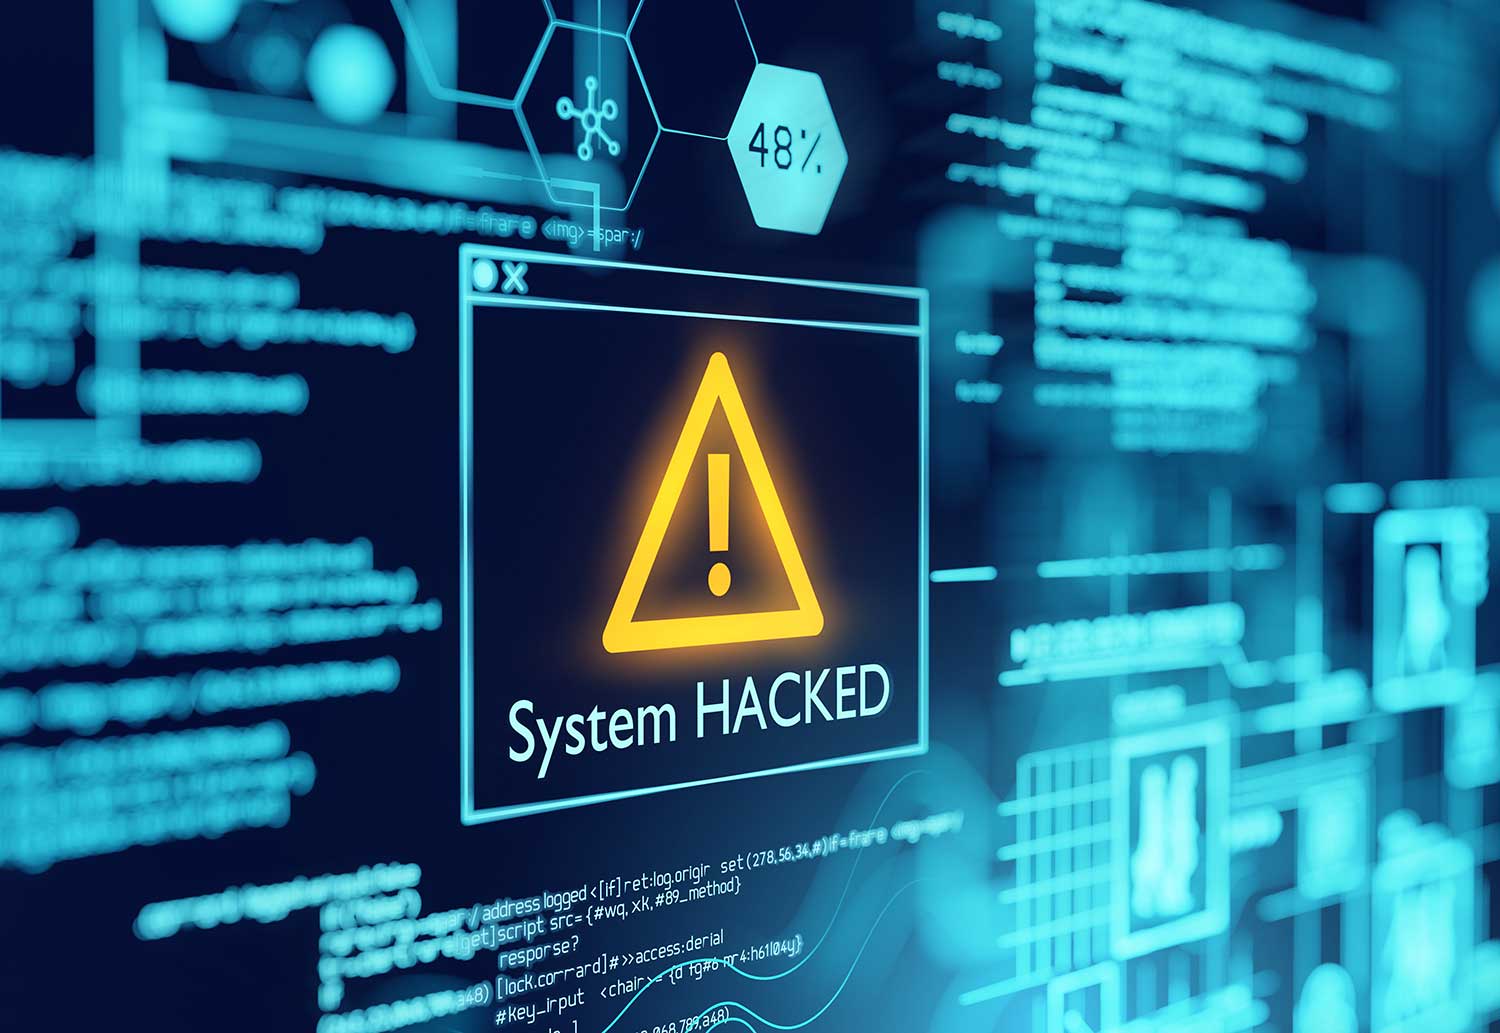 Can Your Medical Office Stay Ahead of Cyber Criminals?